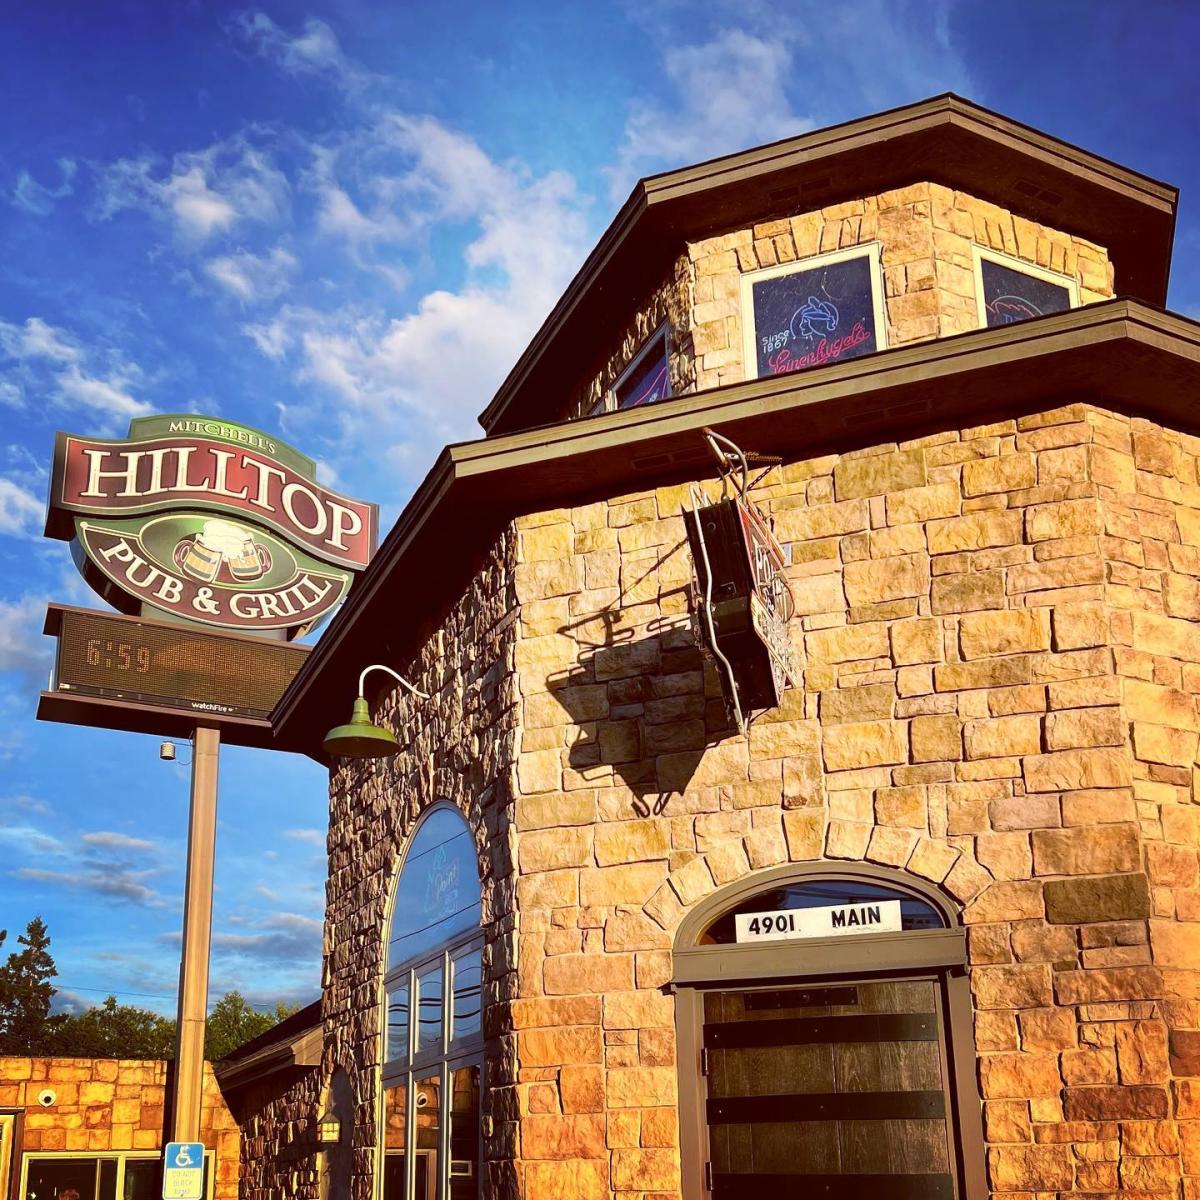 Try the curds at Hilltop Pub & Grill